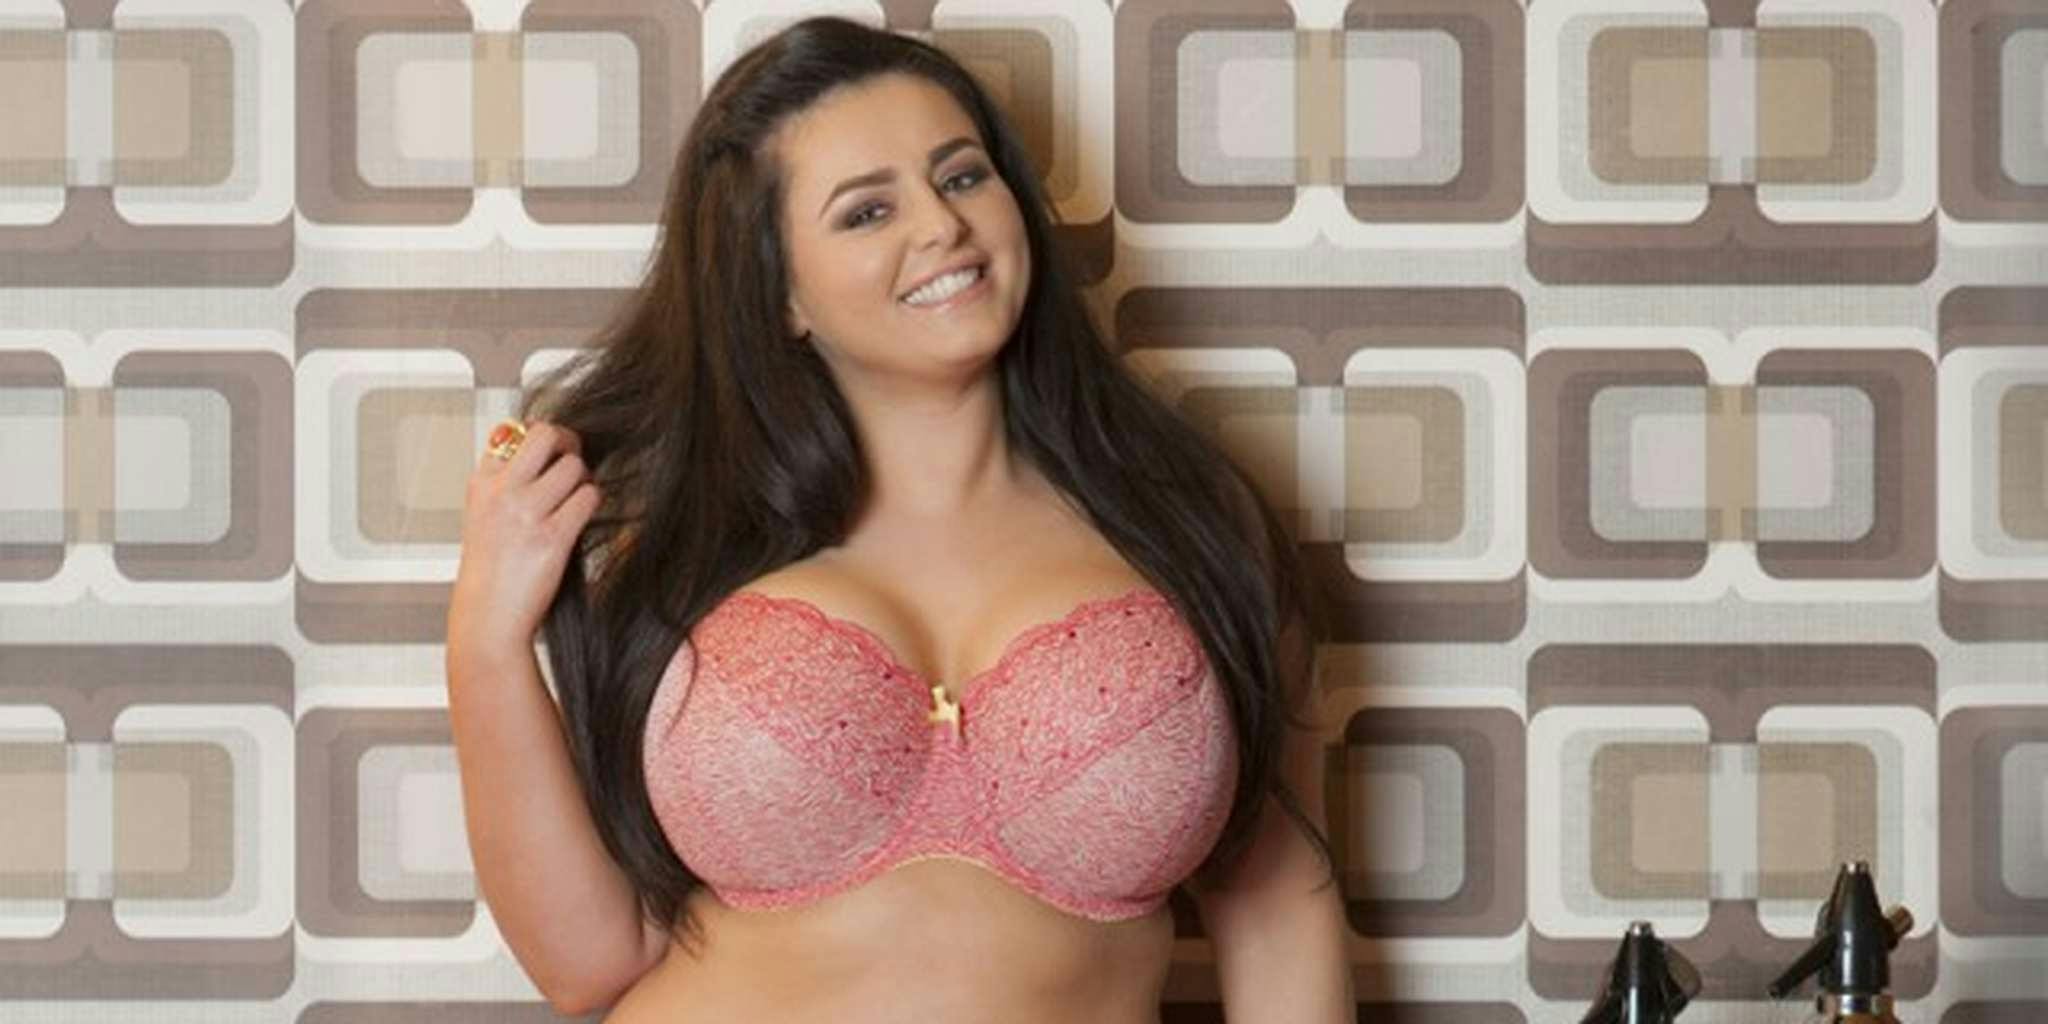 Meet the 21-year-old winner of this plus-size lingerie modeling